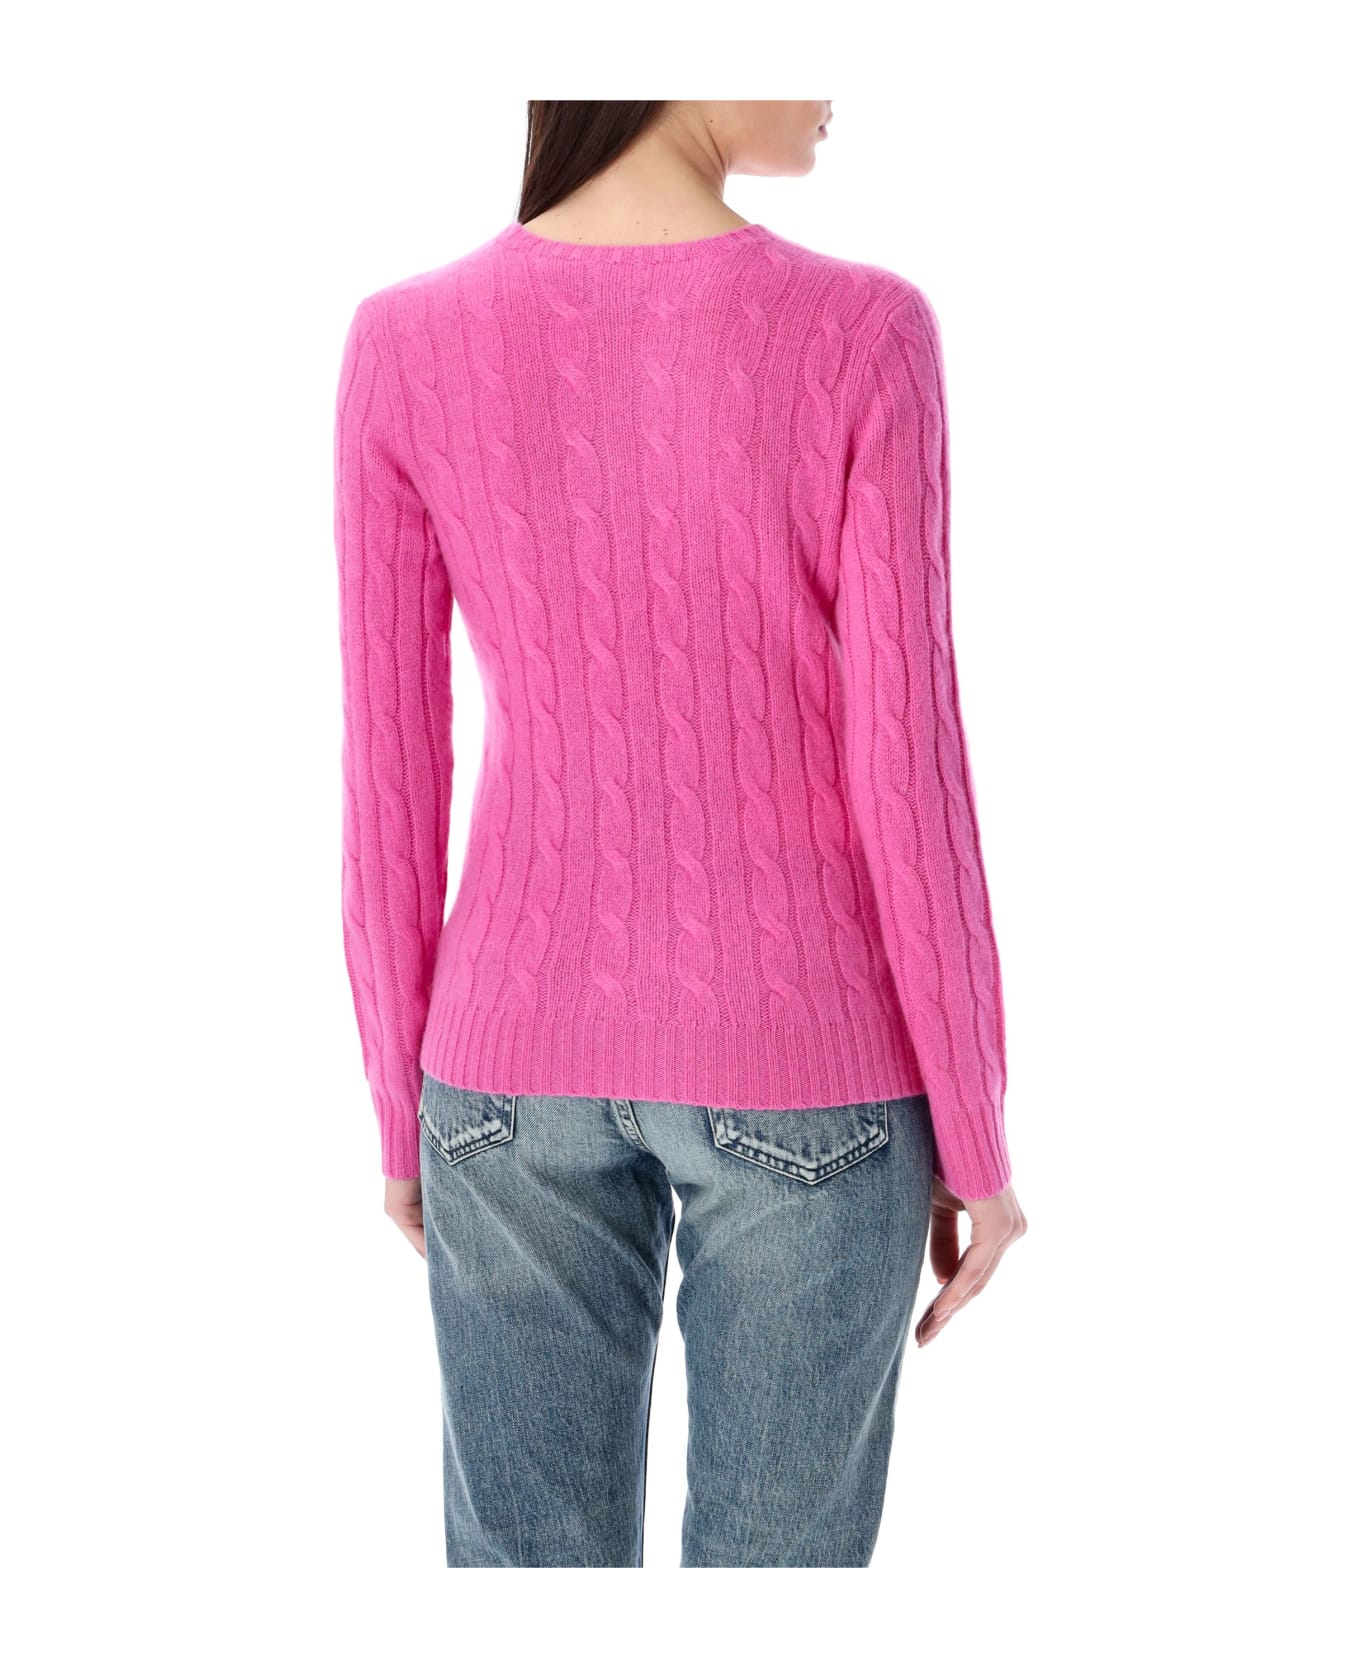 Polo Ralph Lauren Julianna Cable Knit Sweater - PINK FUXIA